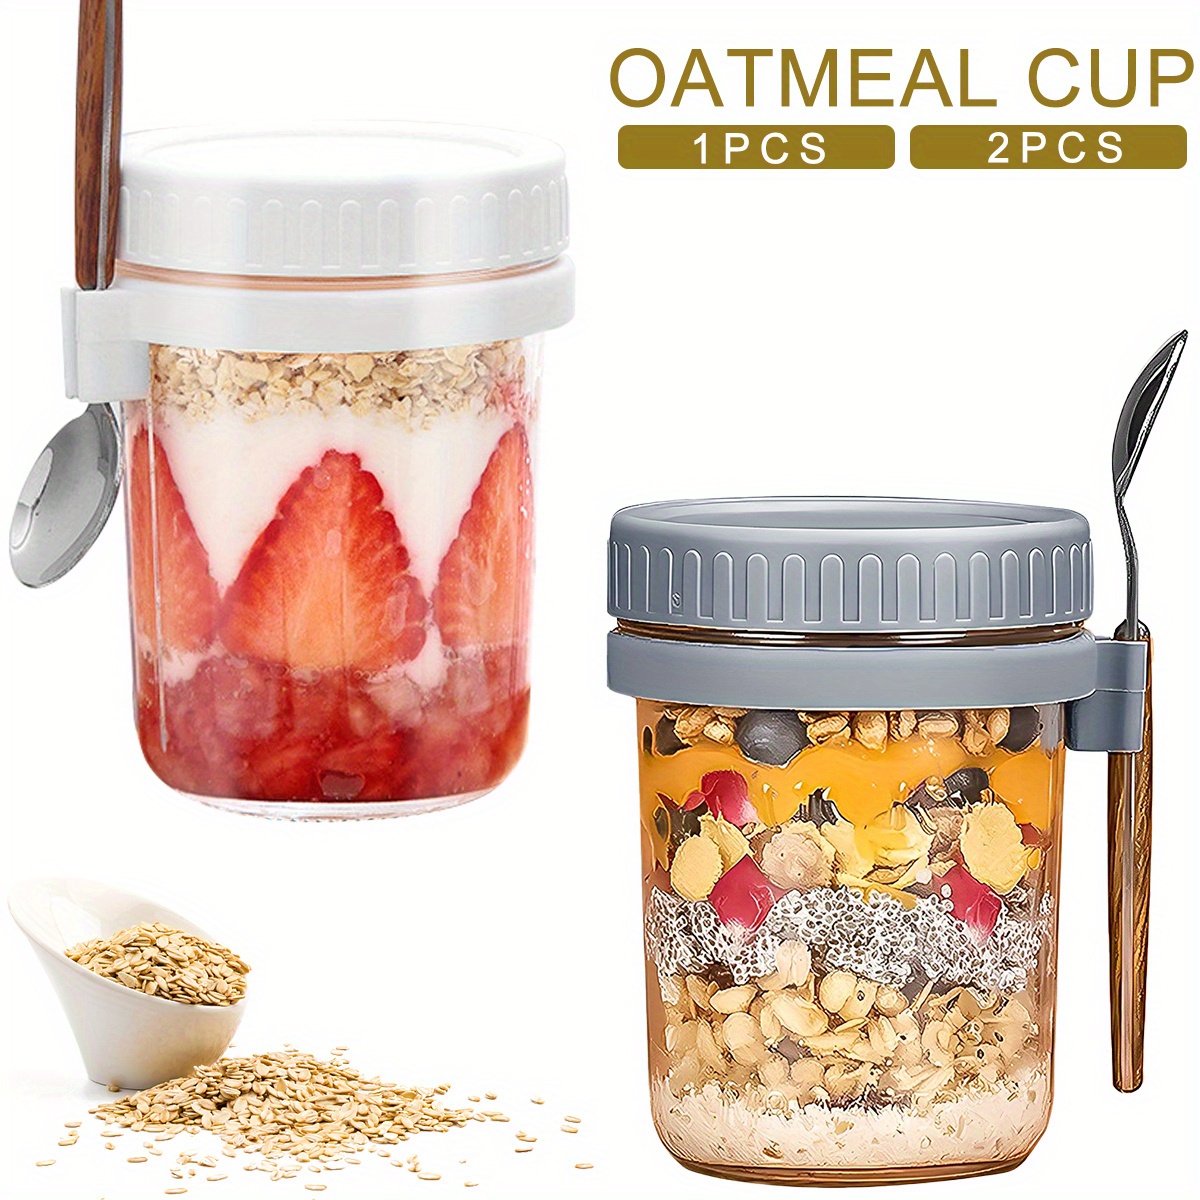 Tekuve 6 Pack Overnight Oats Containers with Lids and Spoons ONLY $17.49 at